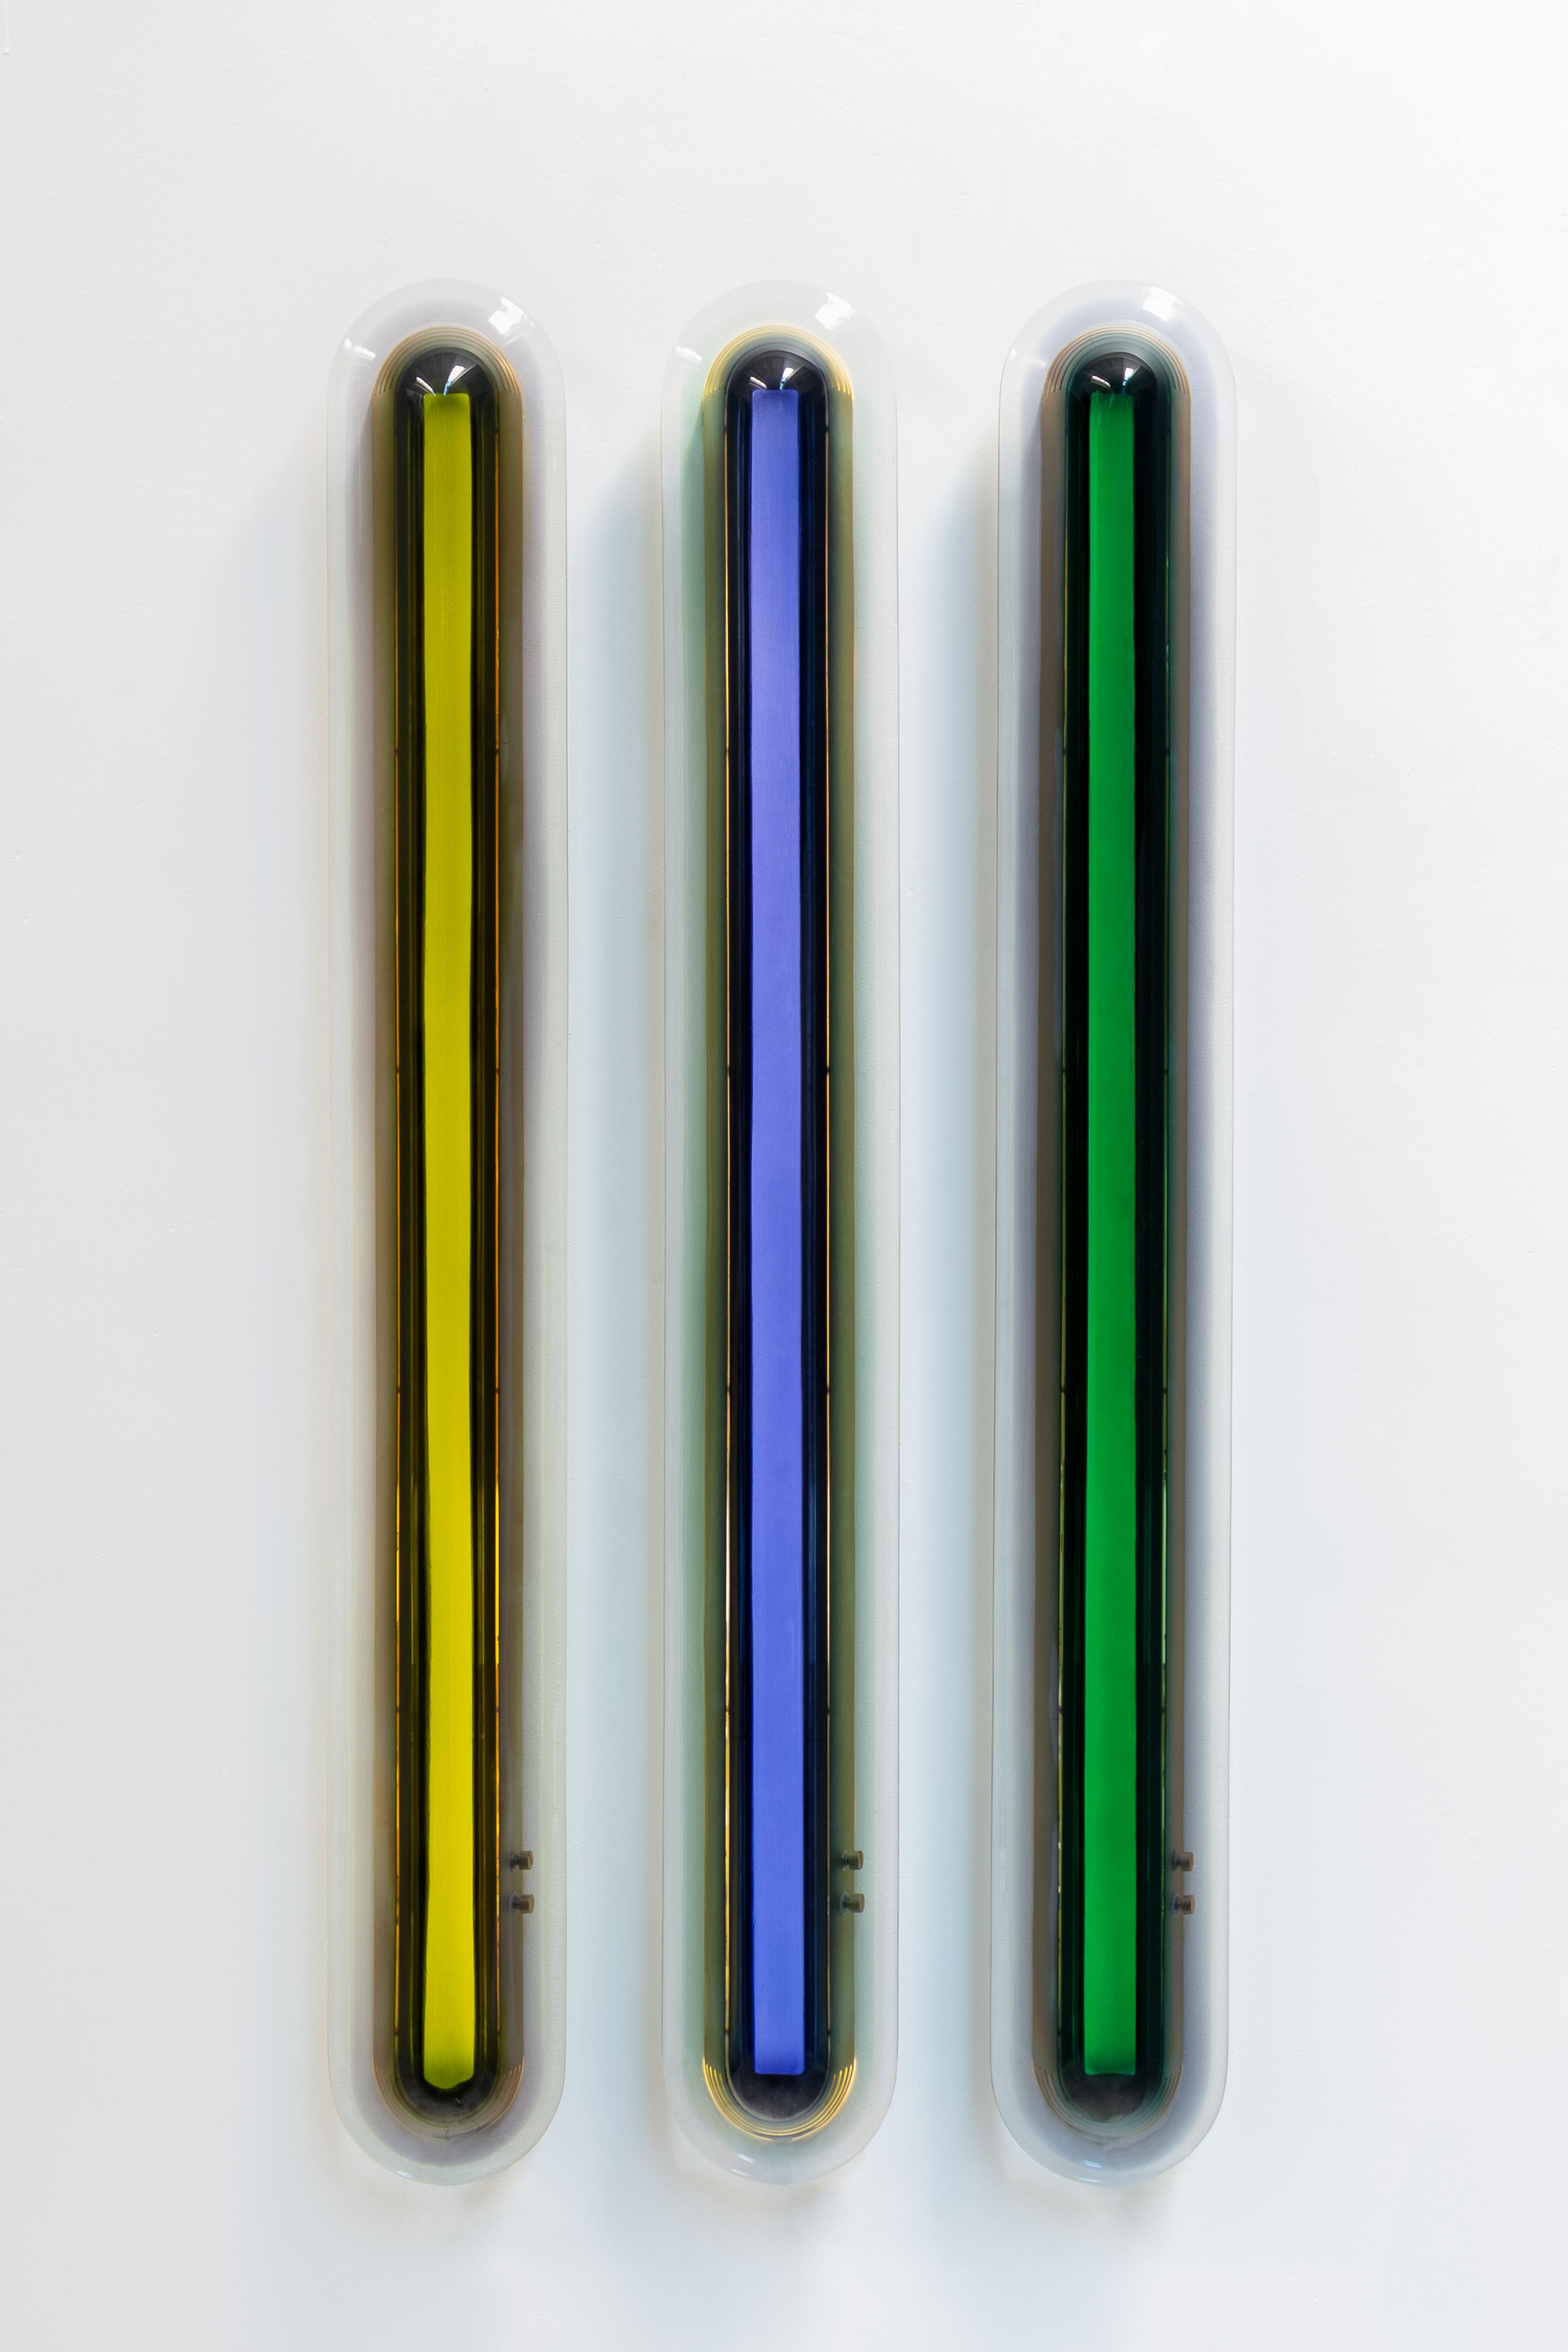 Taking cues from the 1970s and the Space Age era, these unique luminous 'capsules' draw on rich, multi-layered epoxy resin and dimmable neon lighting to produce deep and lustrous hues. By skilfully layering harmonizing tones, they emit a gentle,